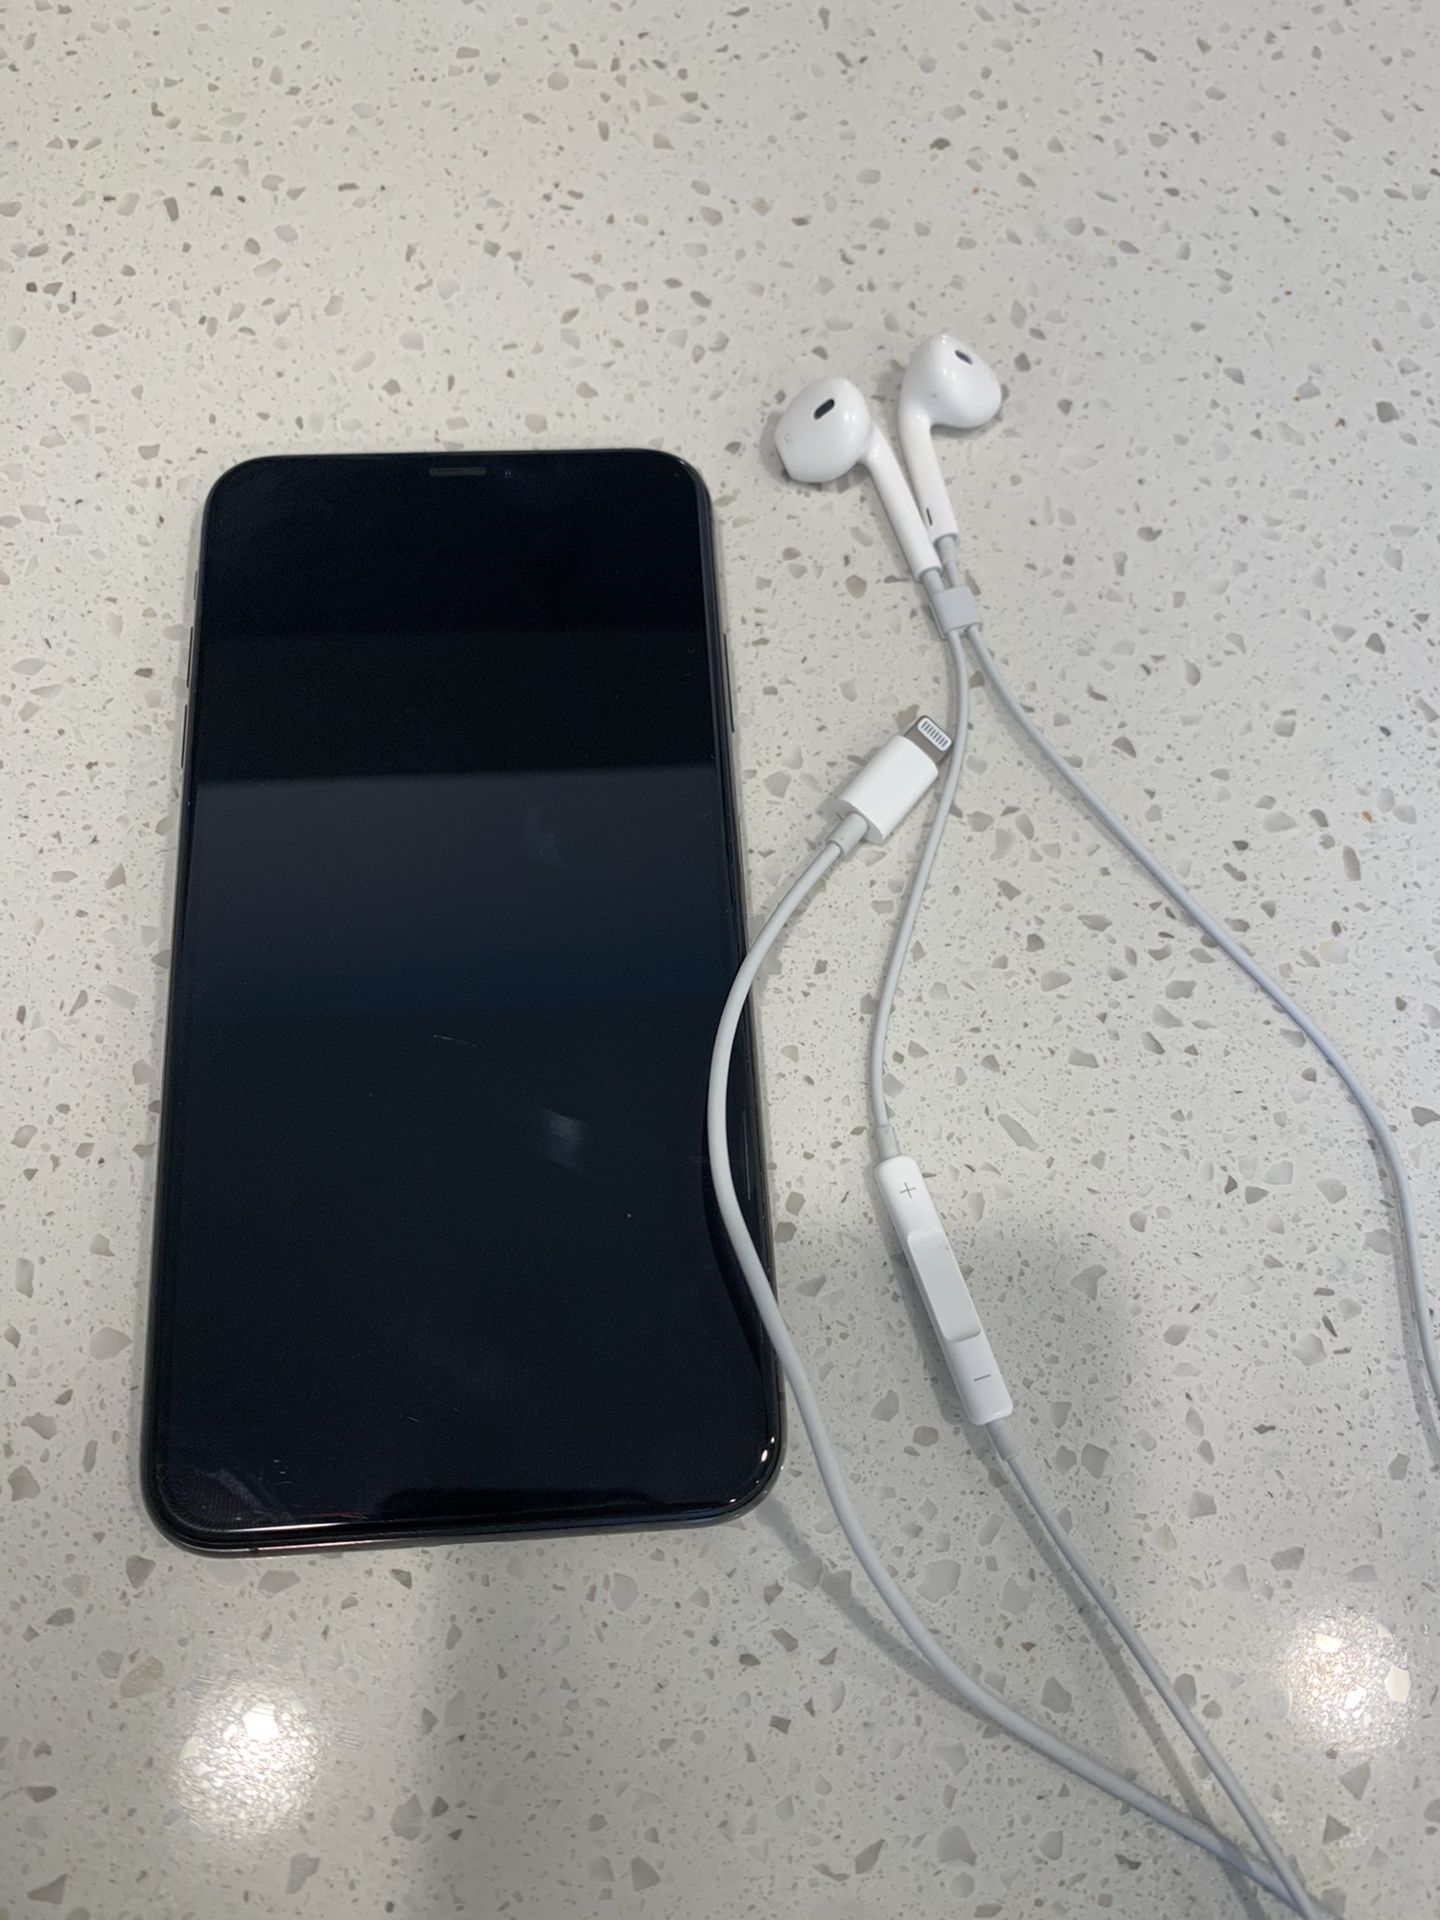 T- Mobile iPhone XS Max 64gb